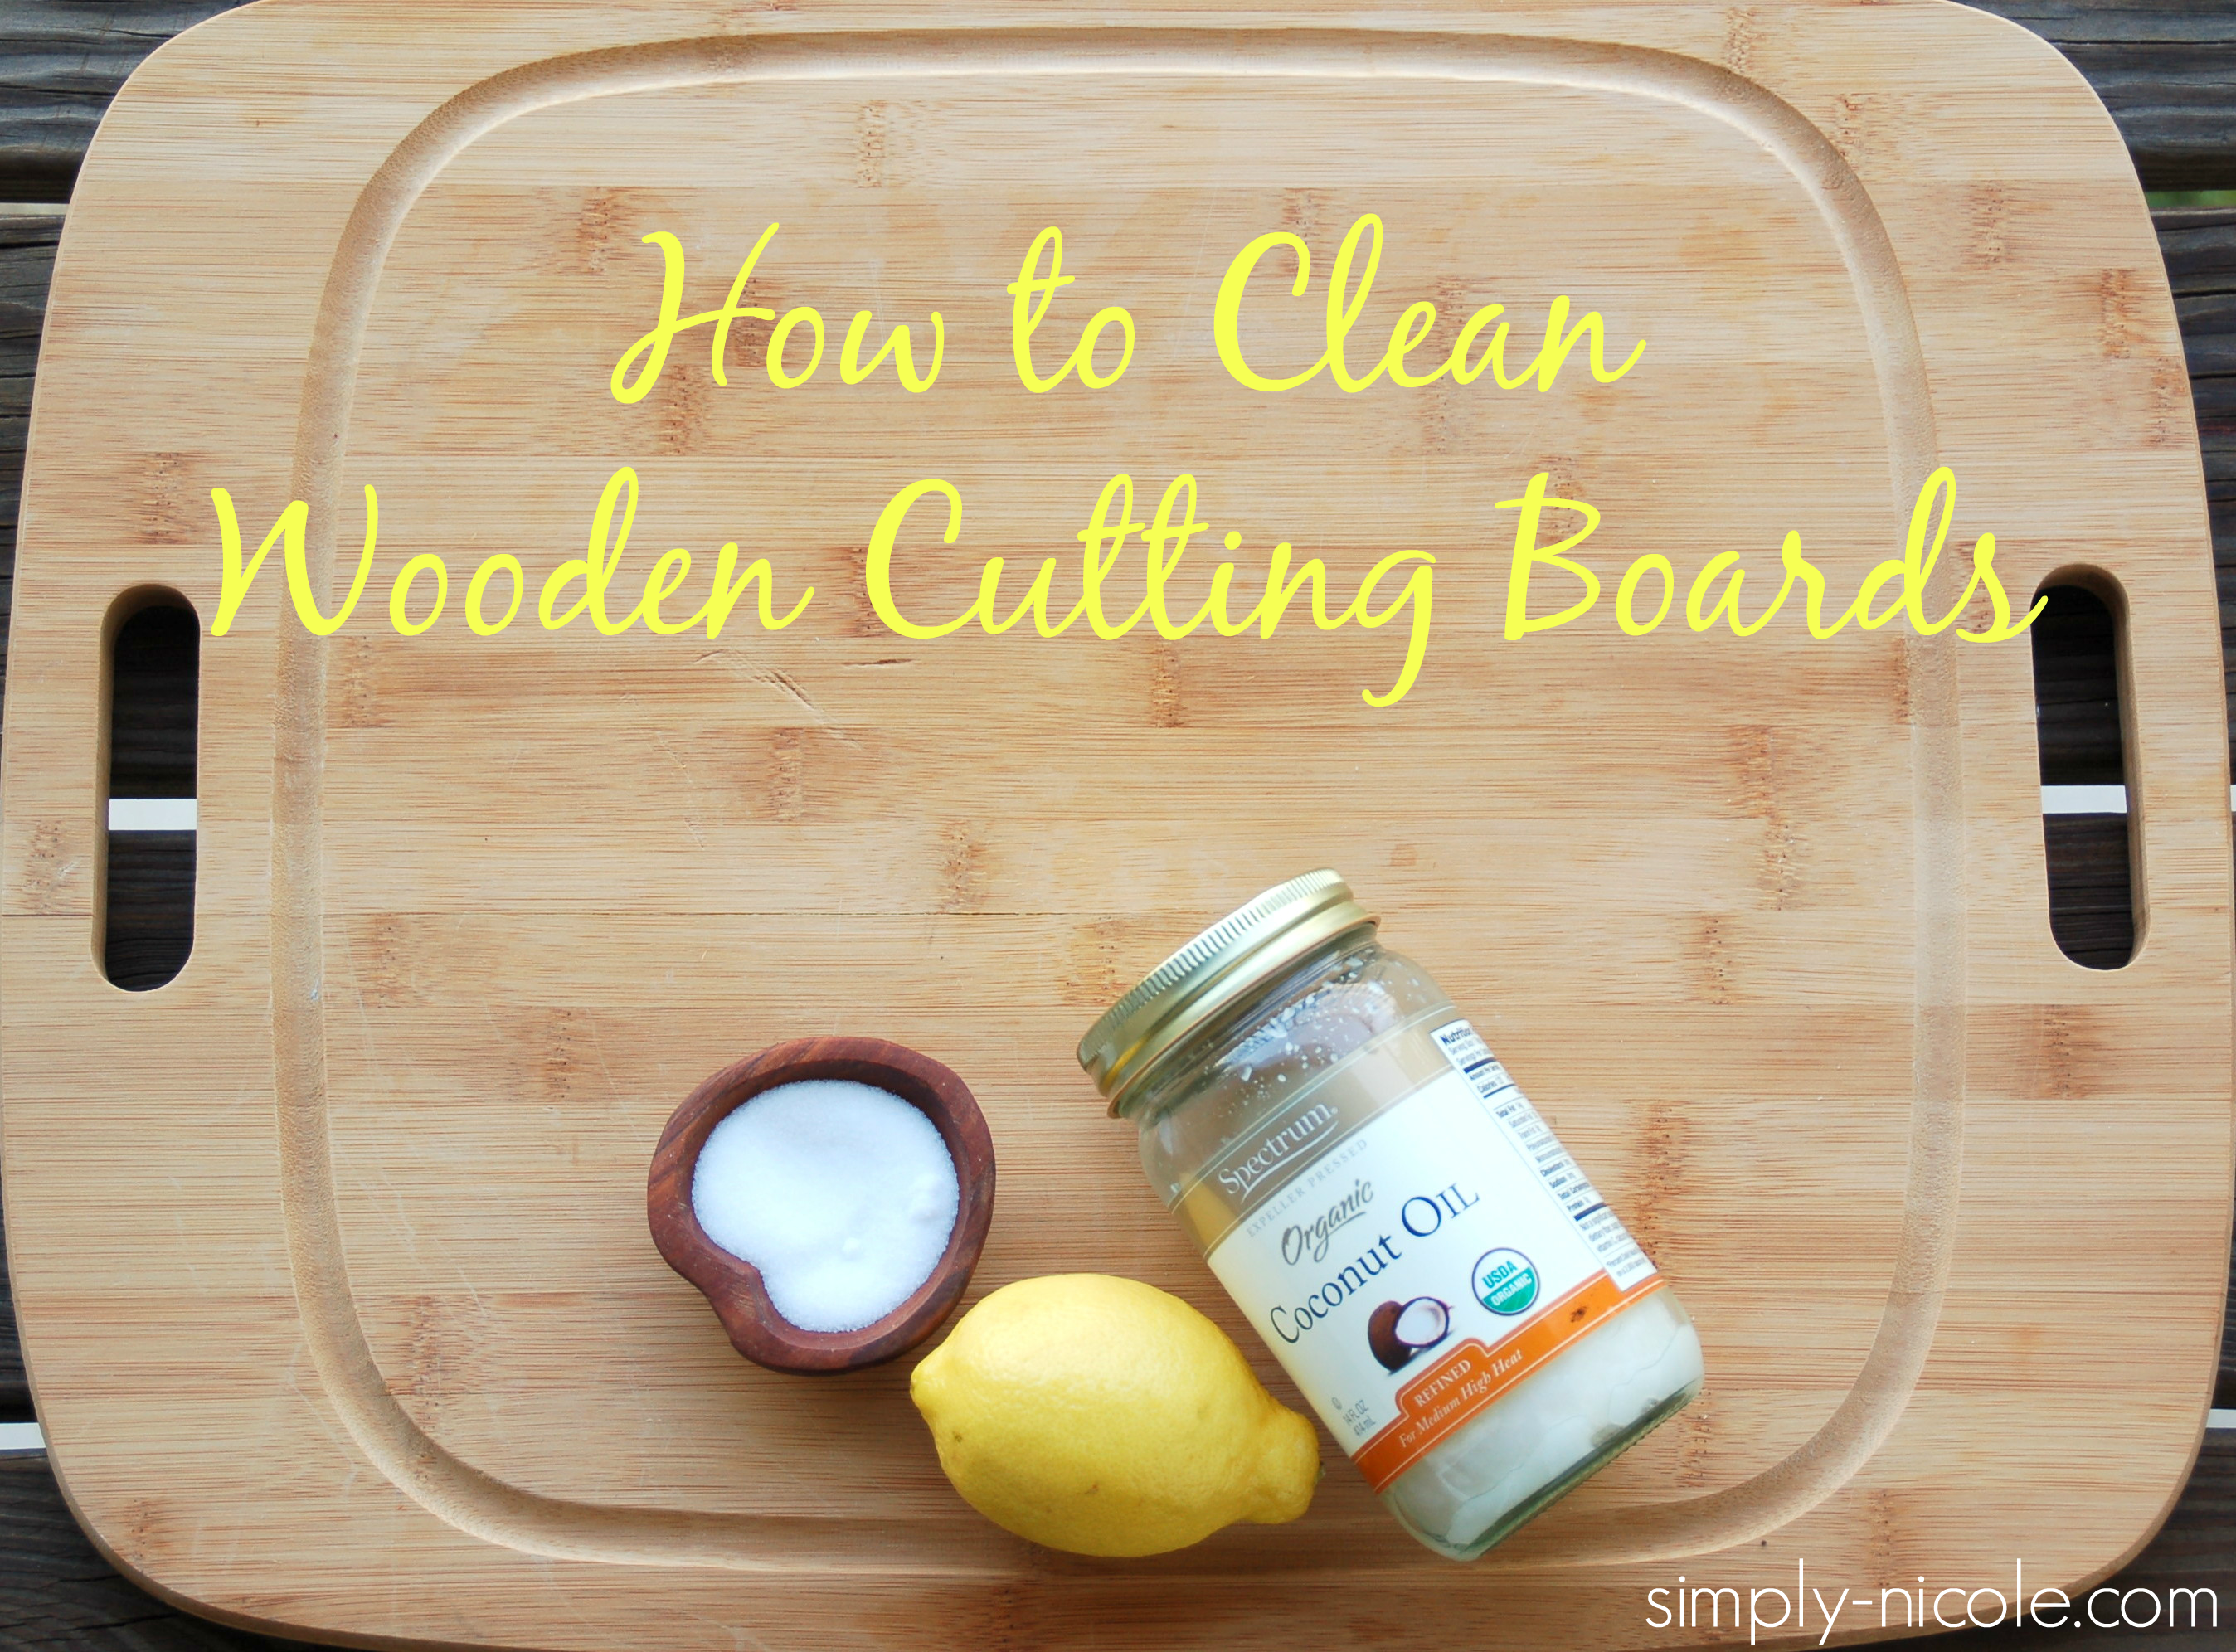 How to Clean Wooden Cutting Boards - Simply Nicole